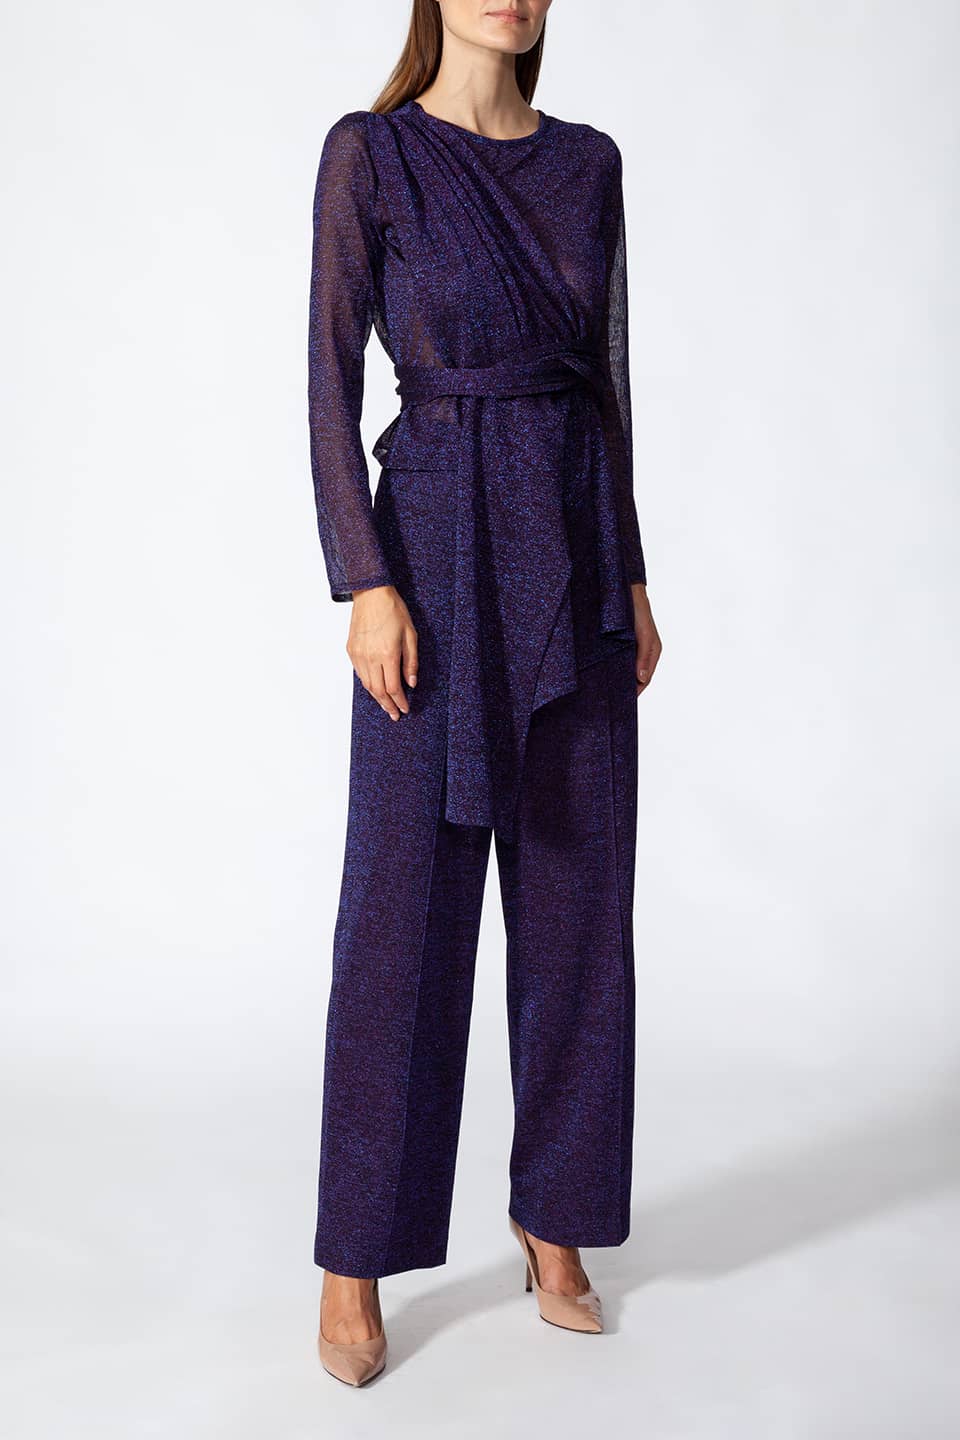 Model in pose wearing Stylist Kukhareva London trousers, with wide leg pants with pressed creases and a hight-rise waist in Purple Color